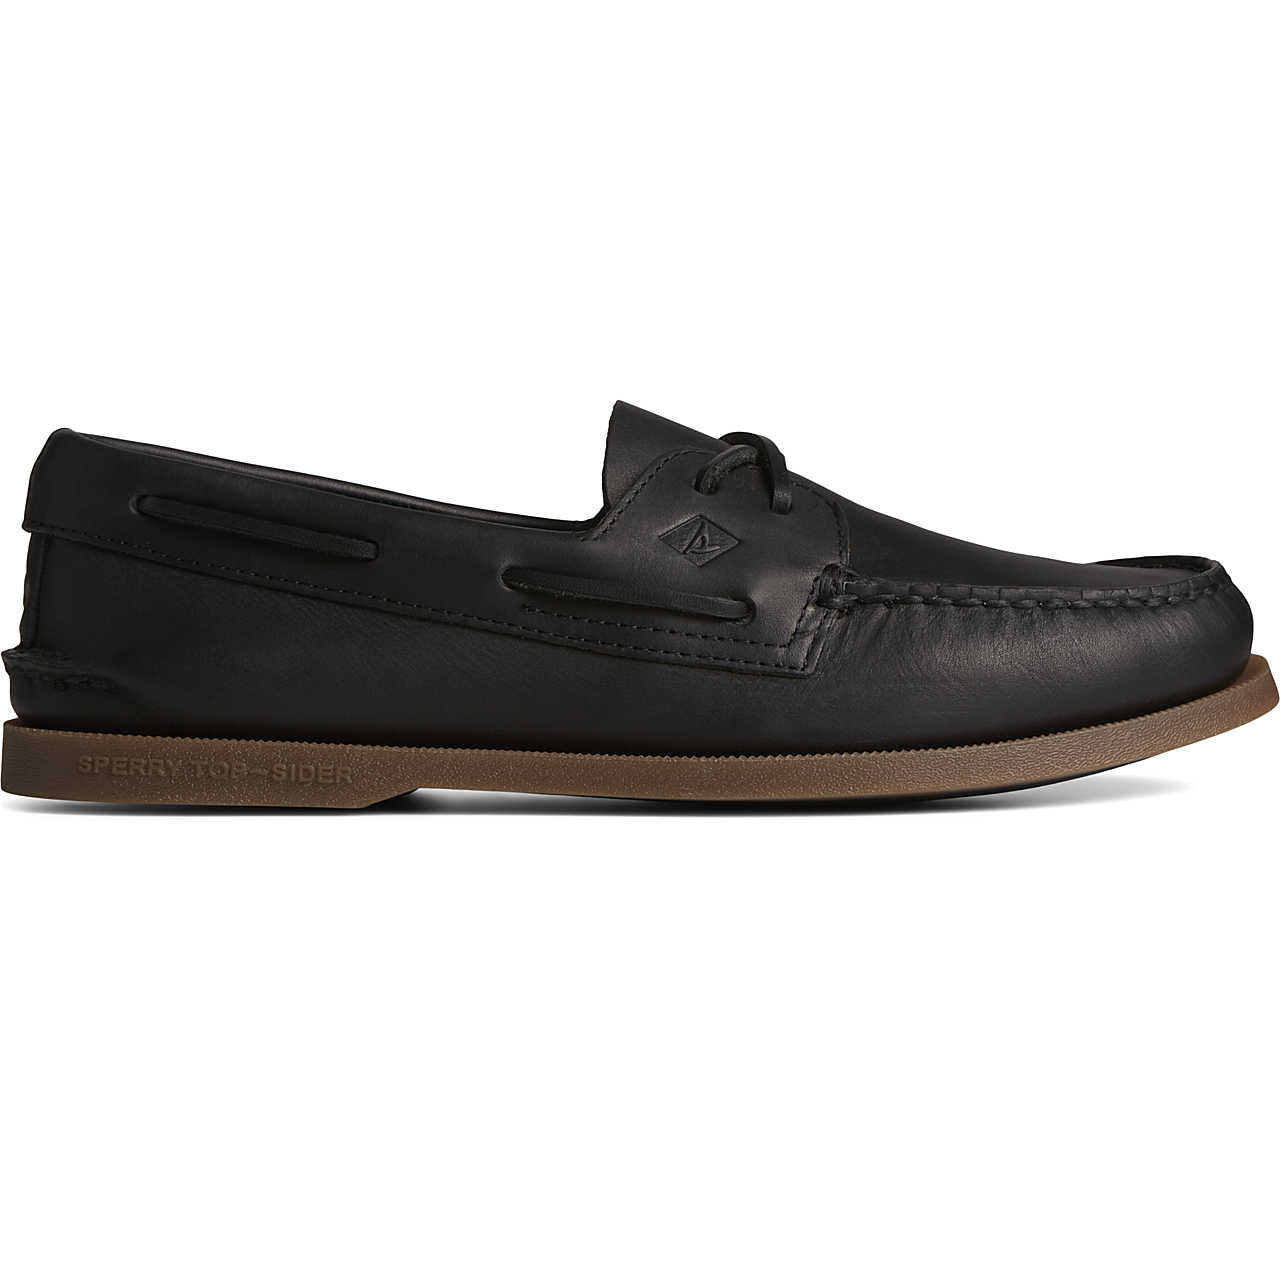 Men's Top-sider Shoes: Boat Shoes, Loafers, Boots & More | Sperry